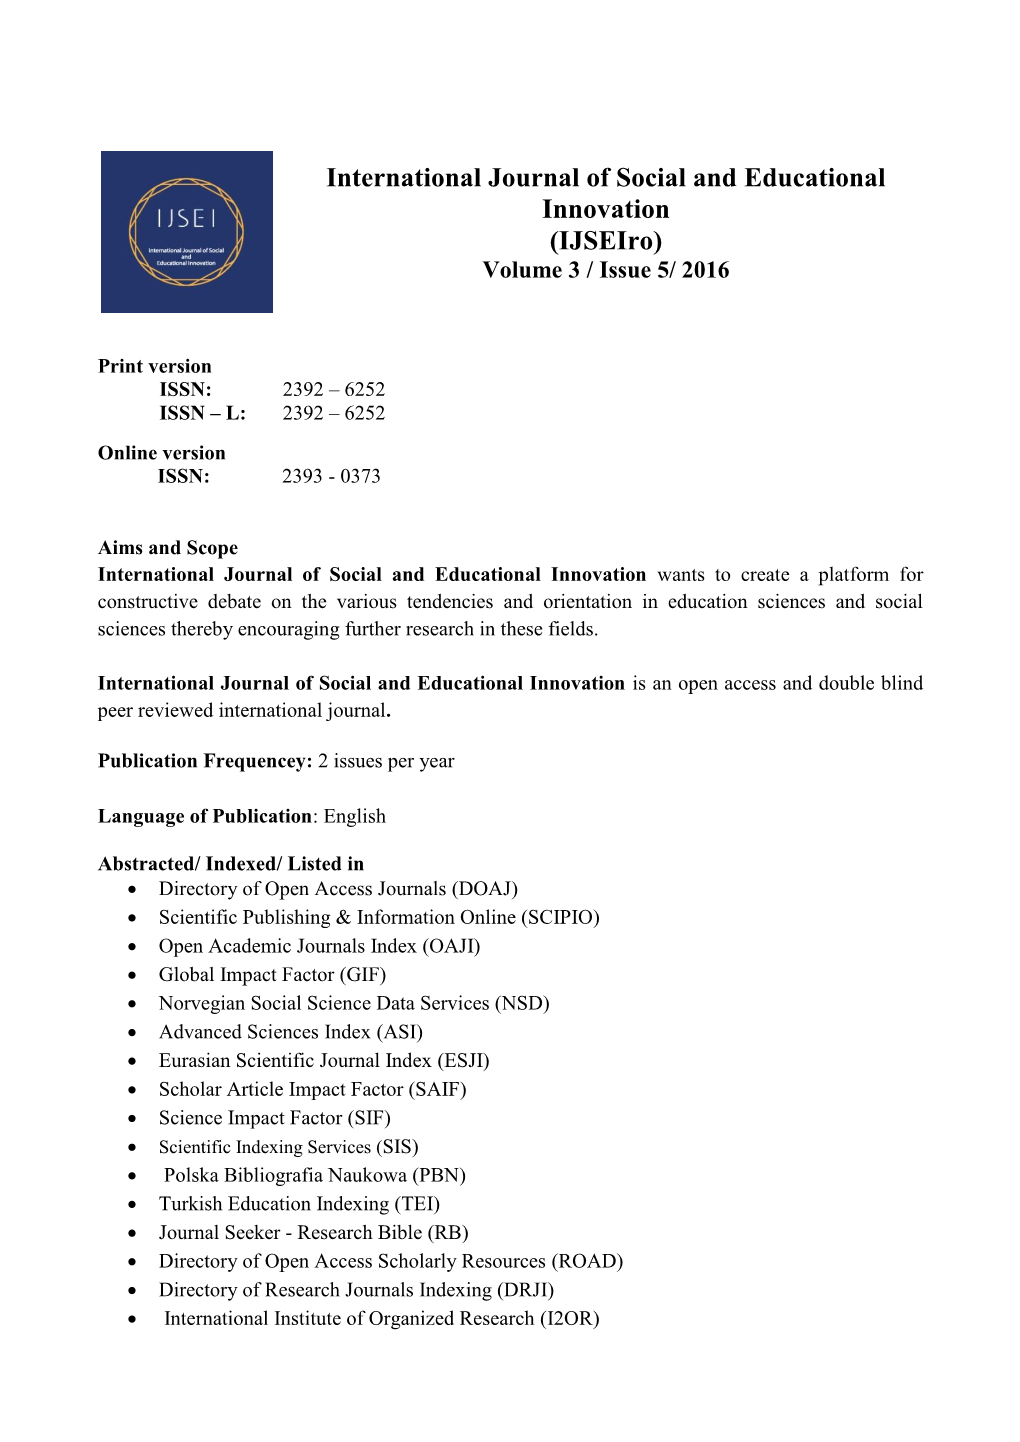 International Journal of Social and Educational Innovation (Ijseiro) Volume 3 / Issue 5/ 2016